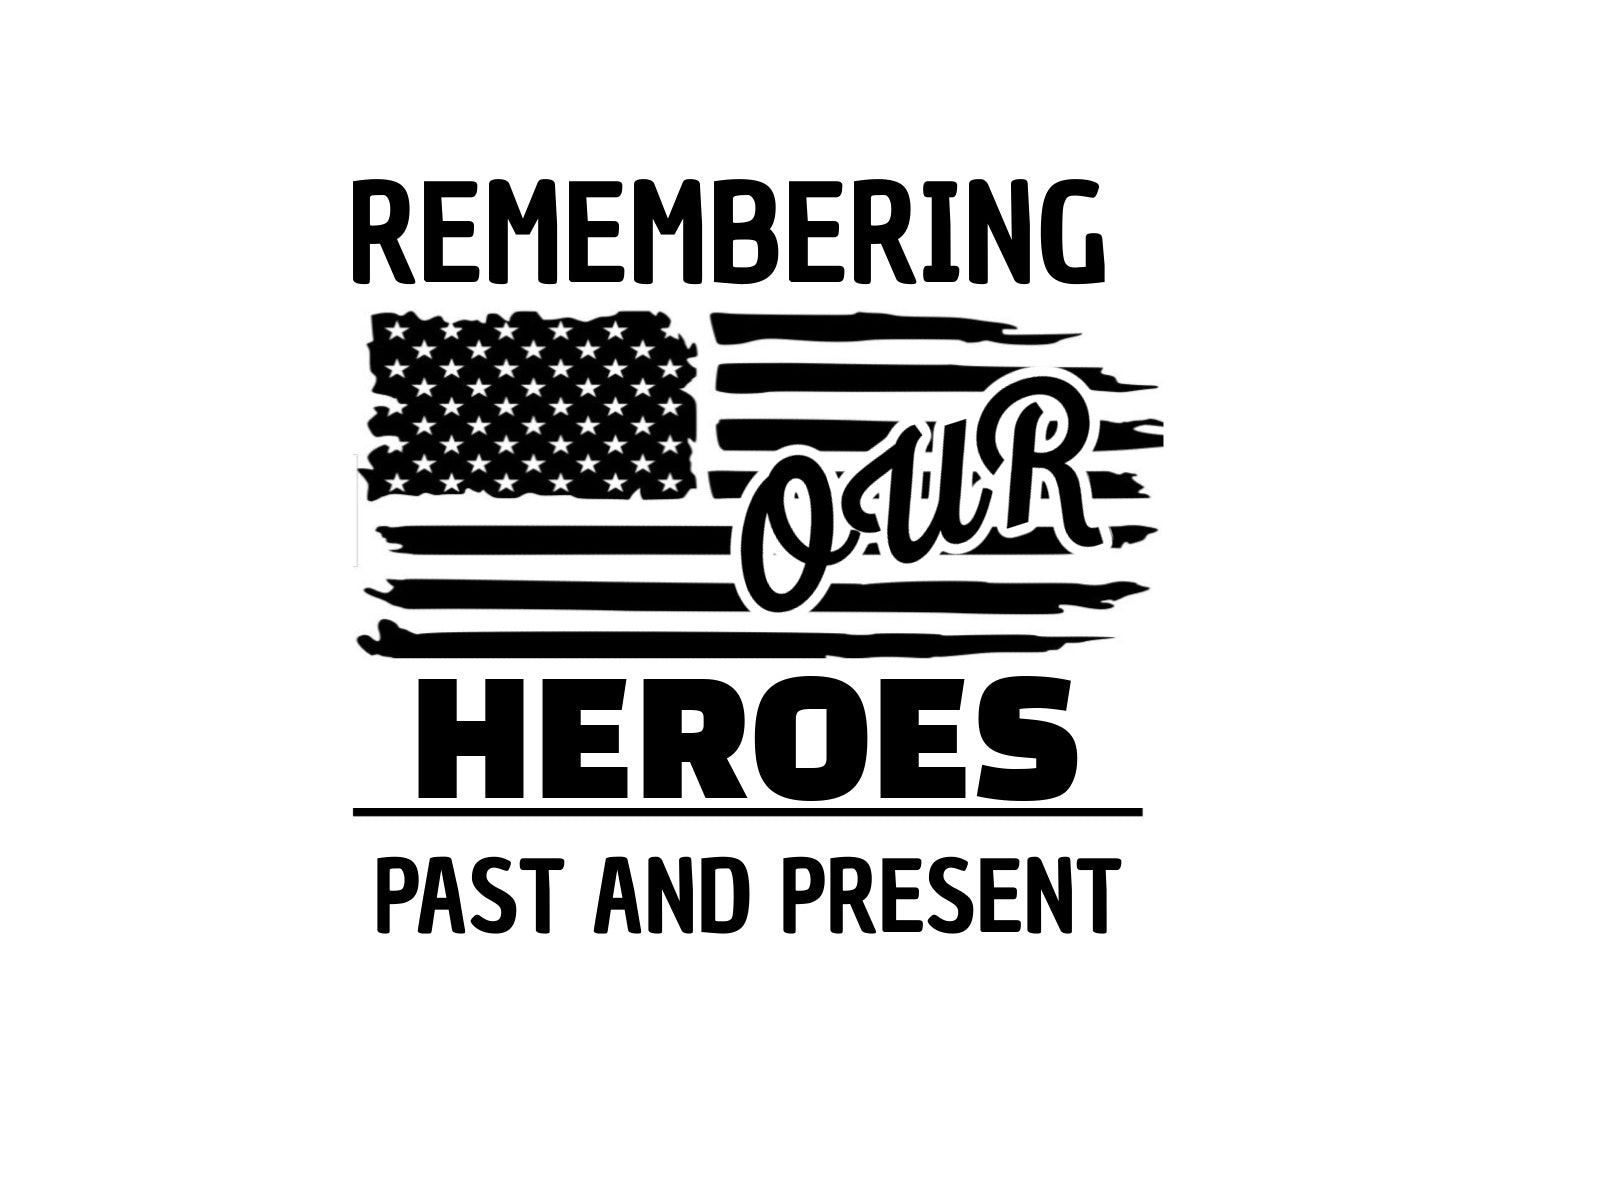 Remembering Our Heroes Past And Present